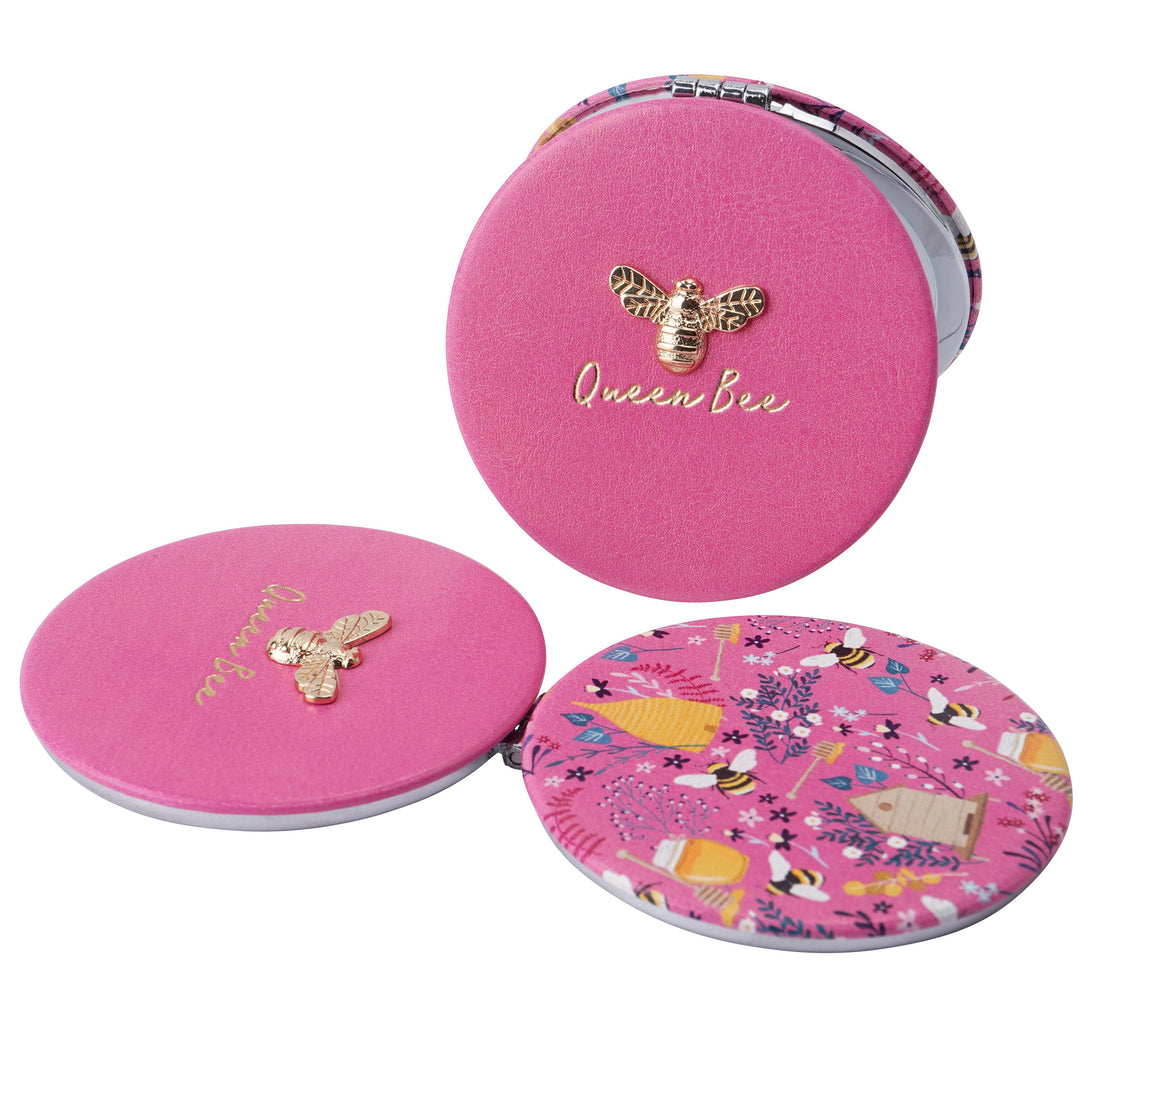 pink circular compact mirror. double sided with one side decorated with a gold bee and text saying 'queen bee' and the other side with a bee print featuring honey and a purple floral design